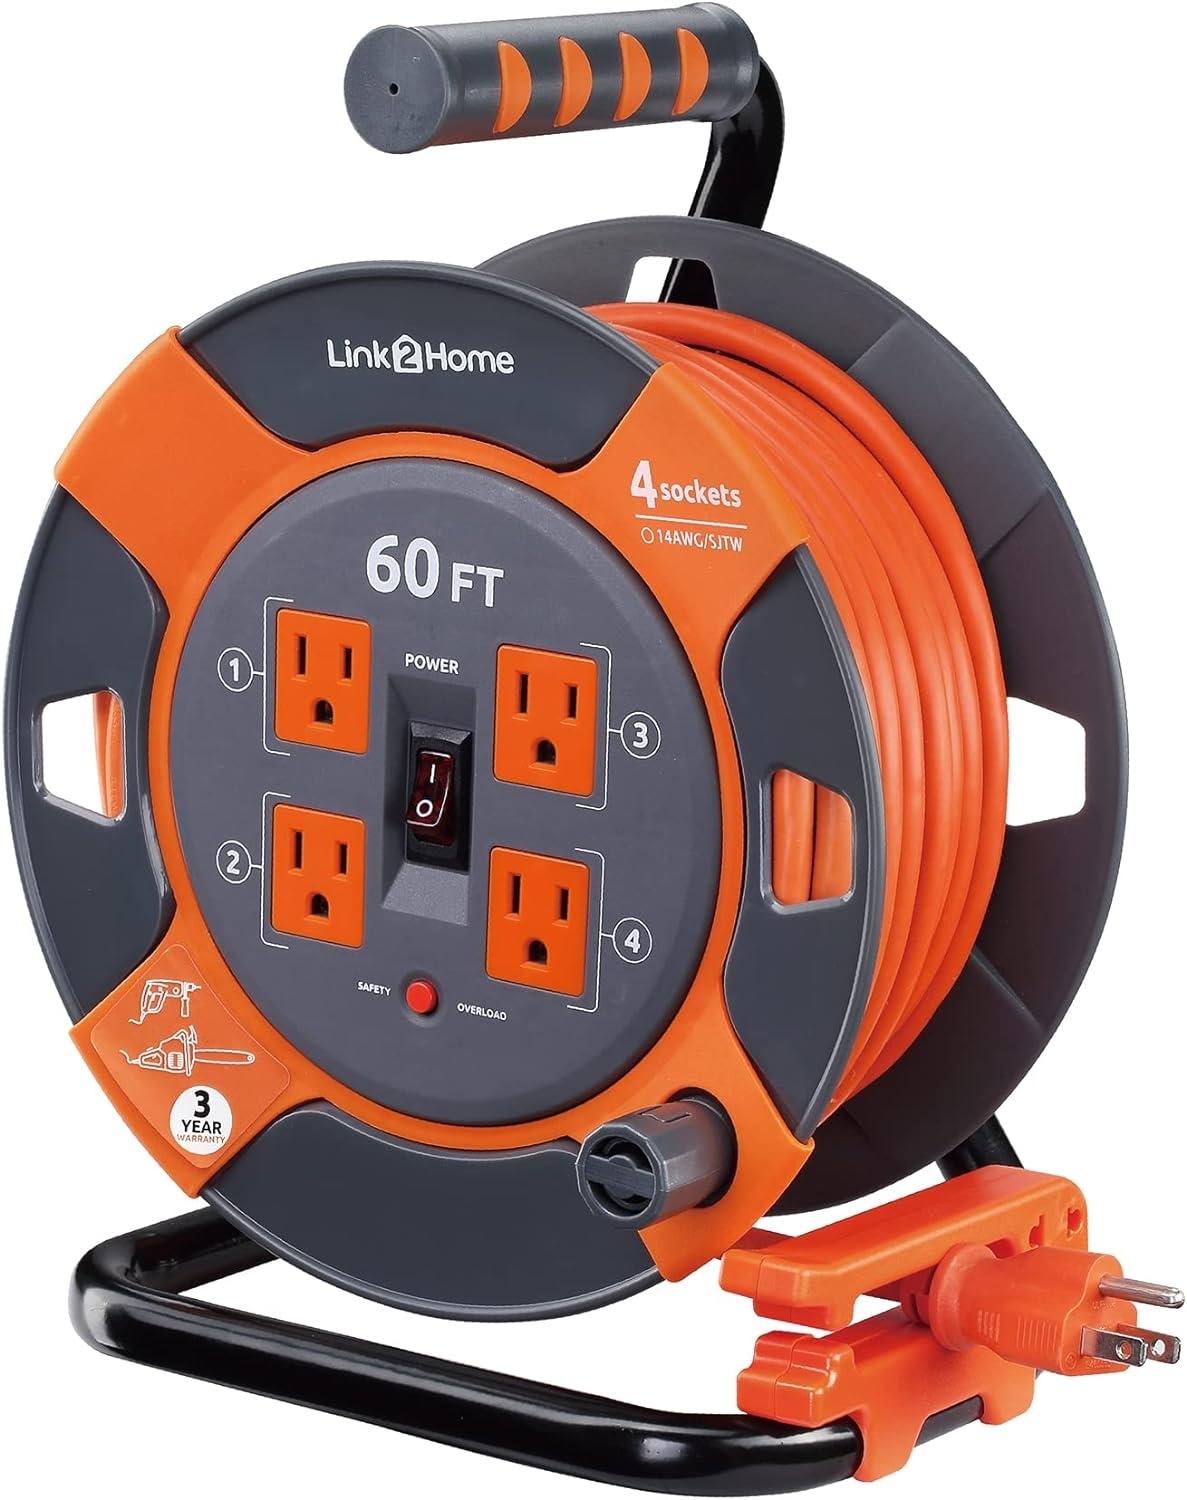 A 60-foot orange and black Link2Home cord reel with four sockets and a retractable power cord